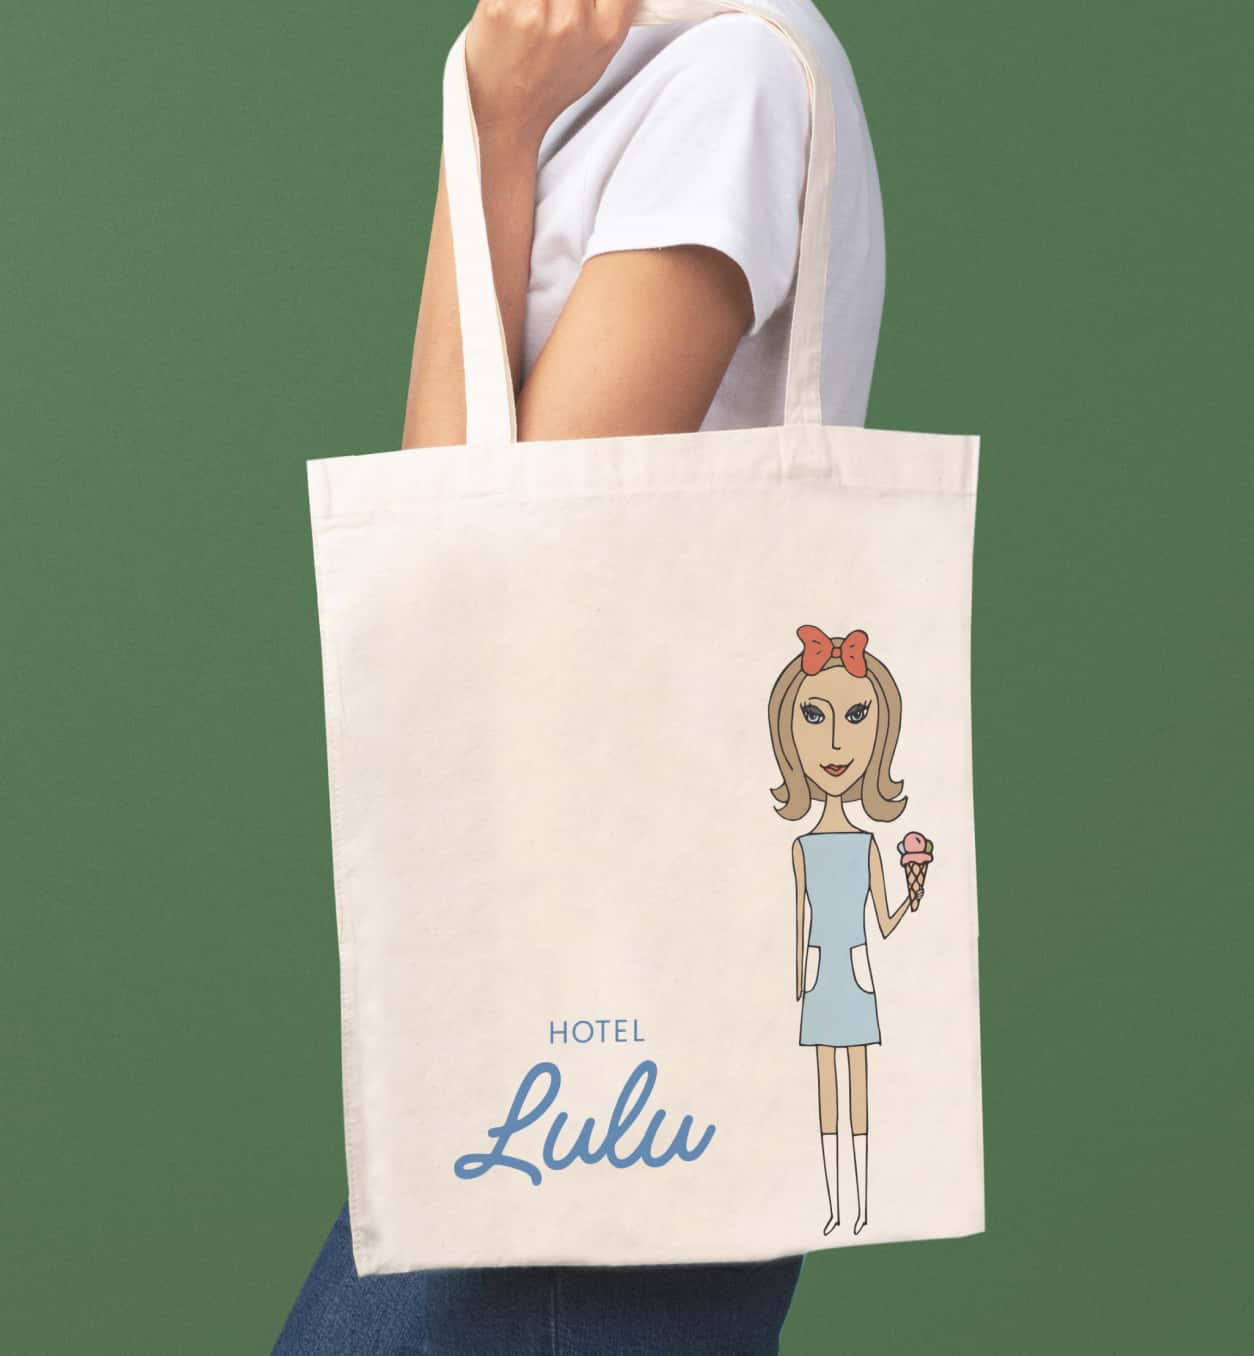 A person carrying a canvas tote bag with 'Hotel Lulu' branding, featuring a drawn female character with a hotel bellhop cart and luggage, indicative of hotel guest services.